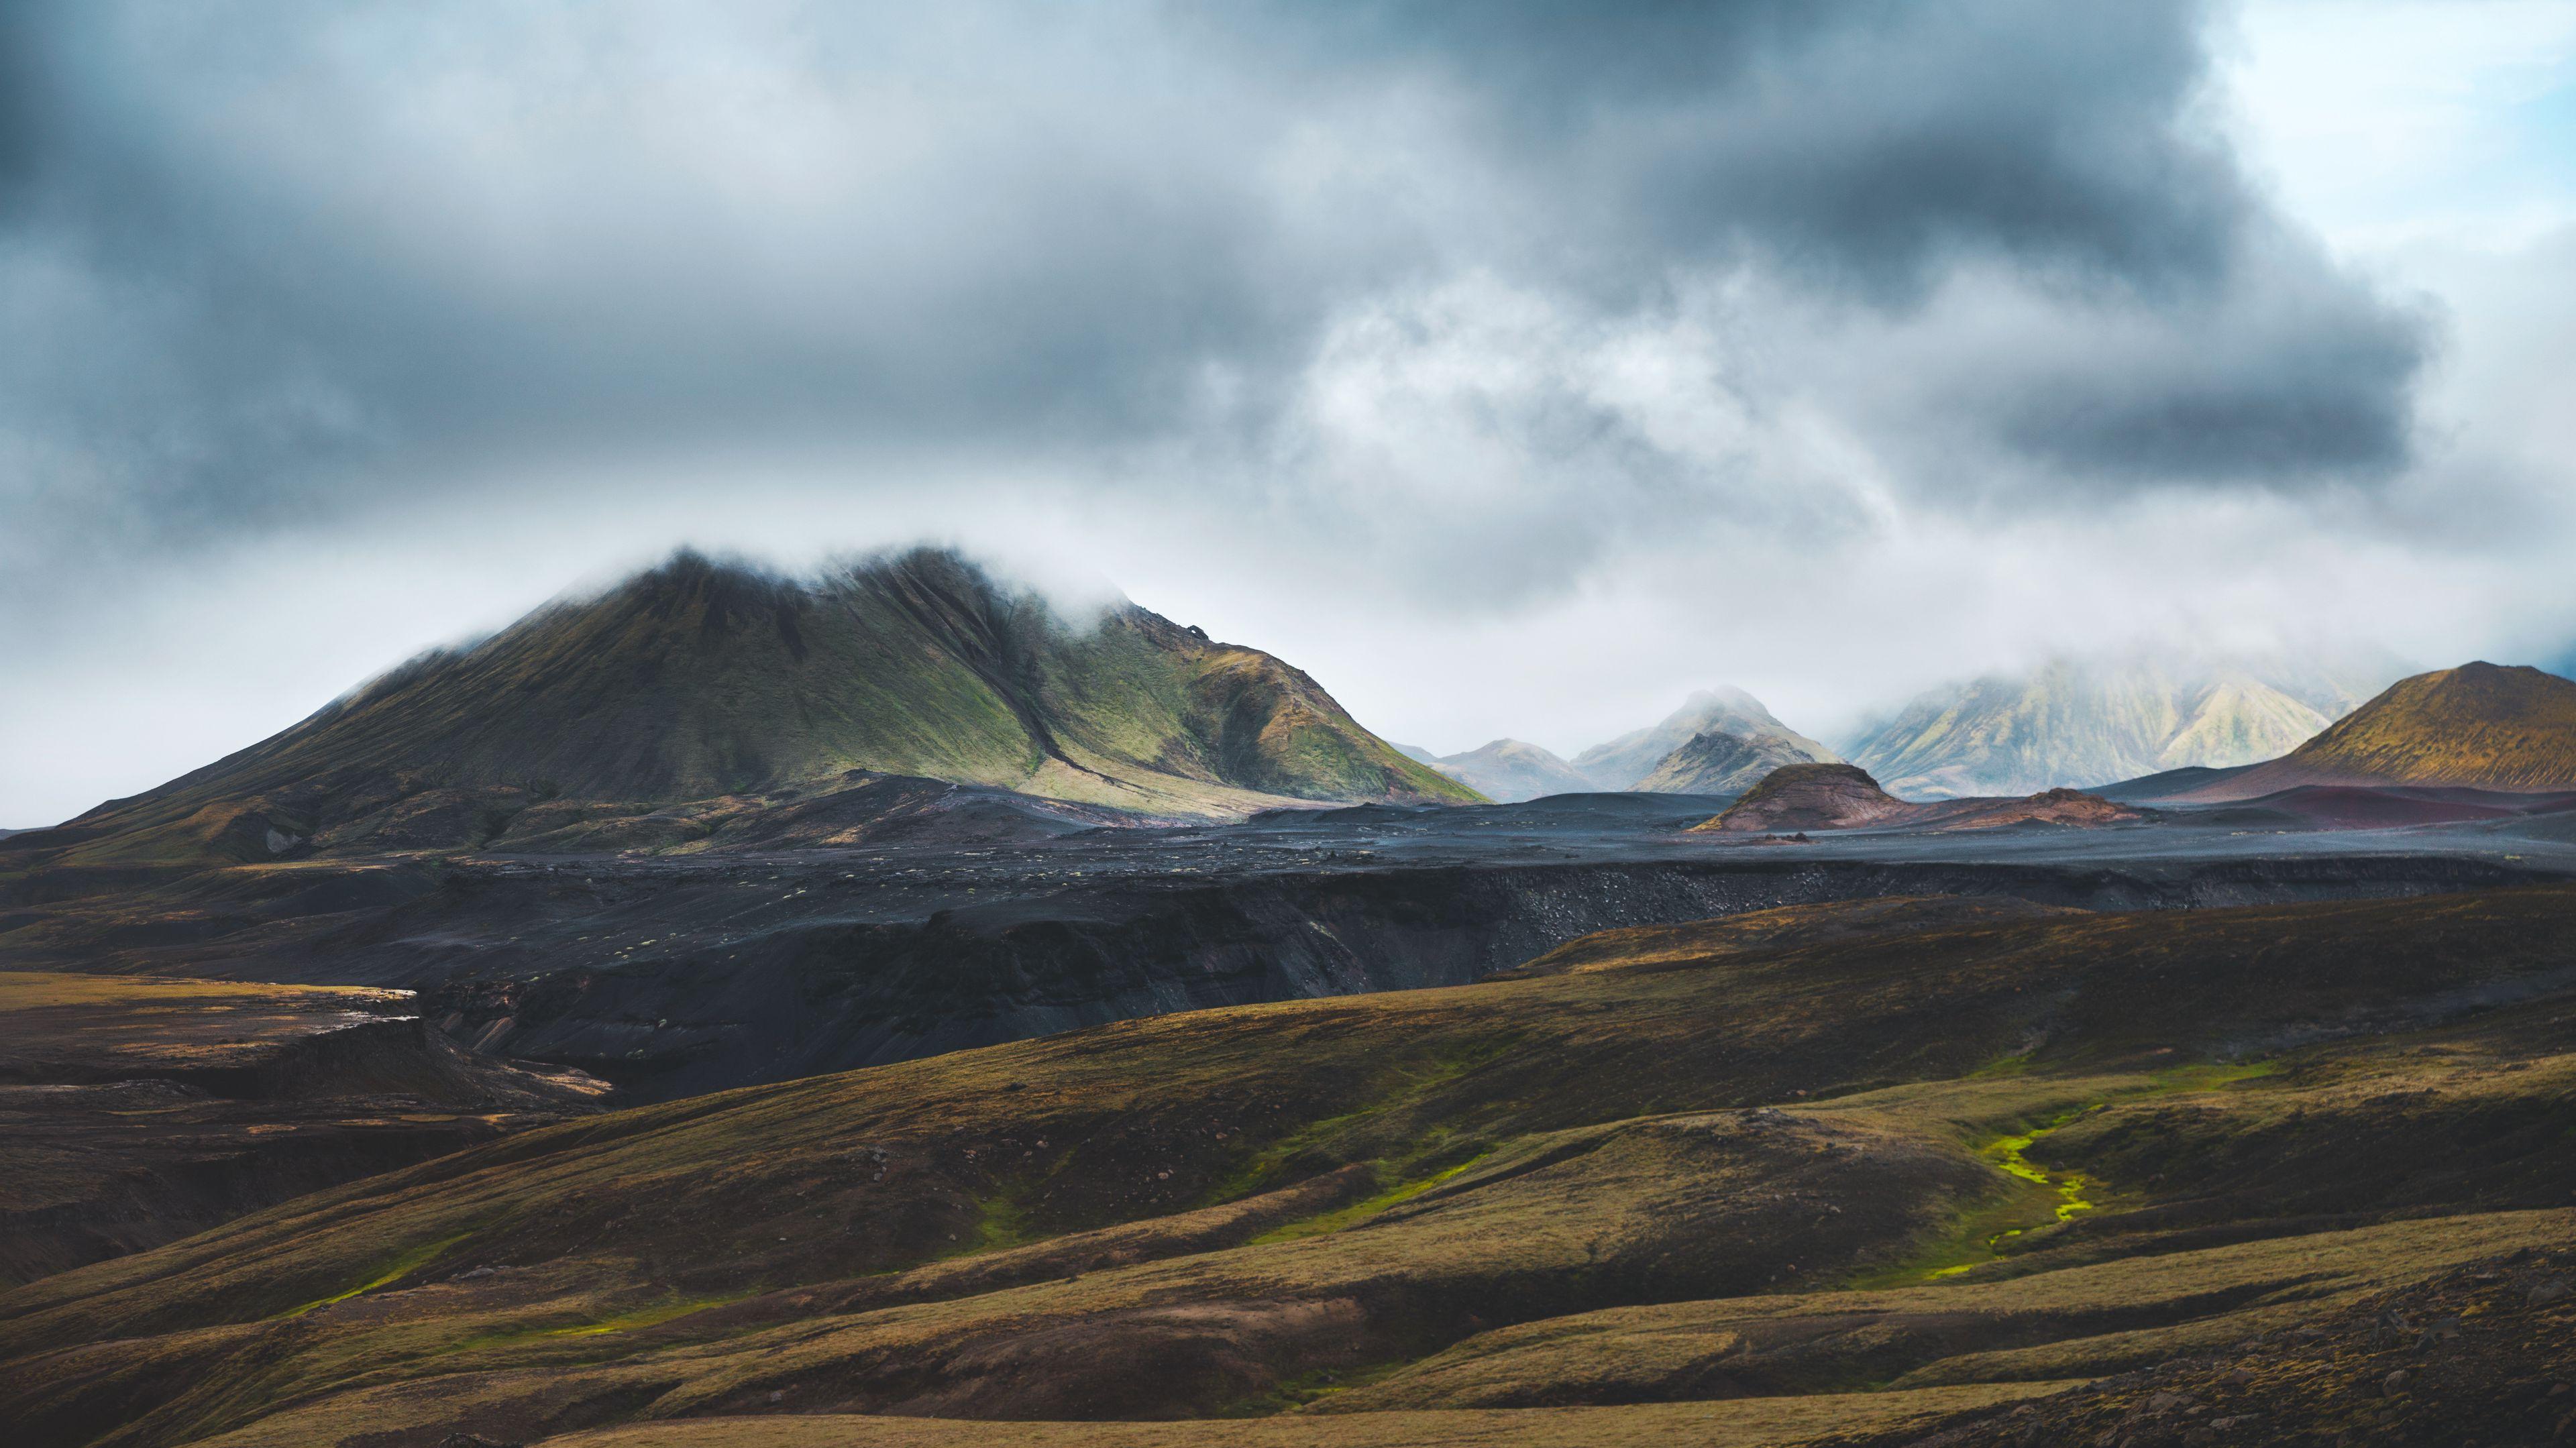 Wallpaper ID 9994 mountains clouds landscape nature iceland